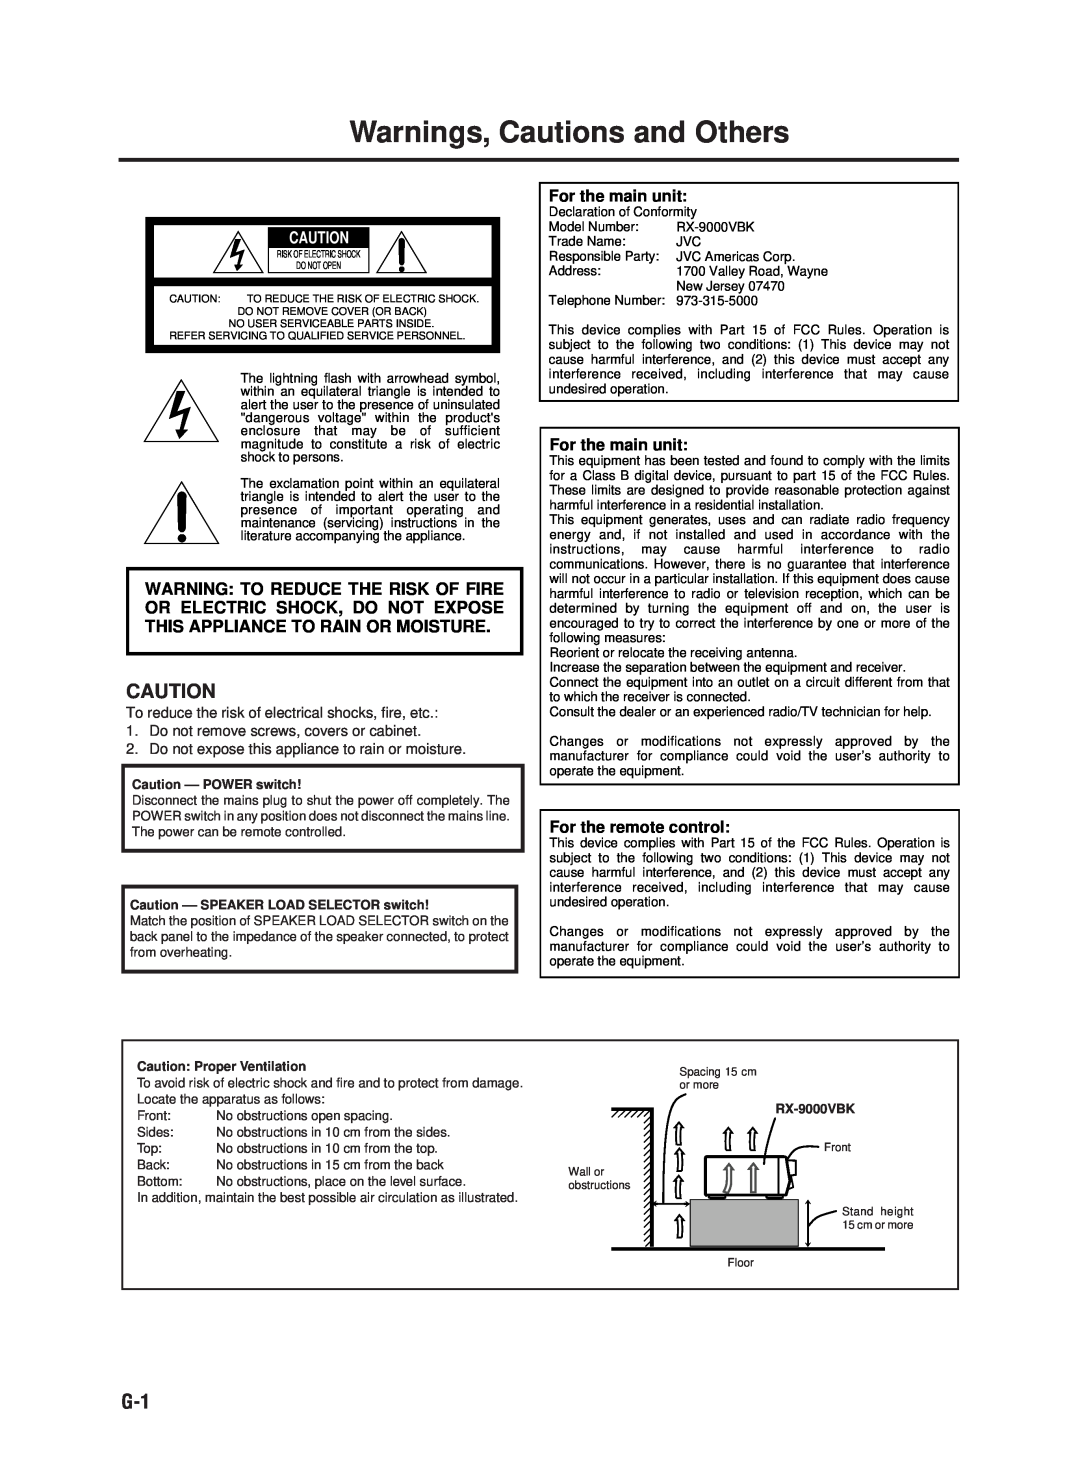 JVC RX-9000VBK manual Warnings, Cautions and Others, For the main unit, For the remote control, Caution ––POWER switch 